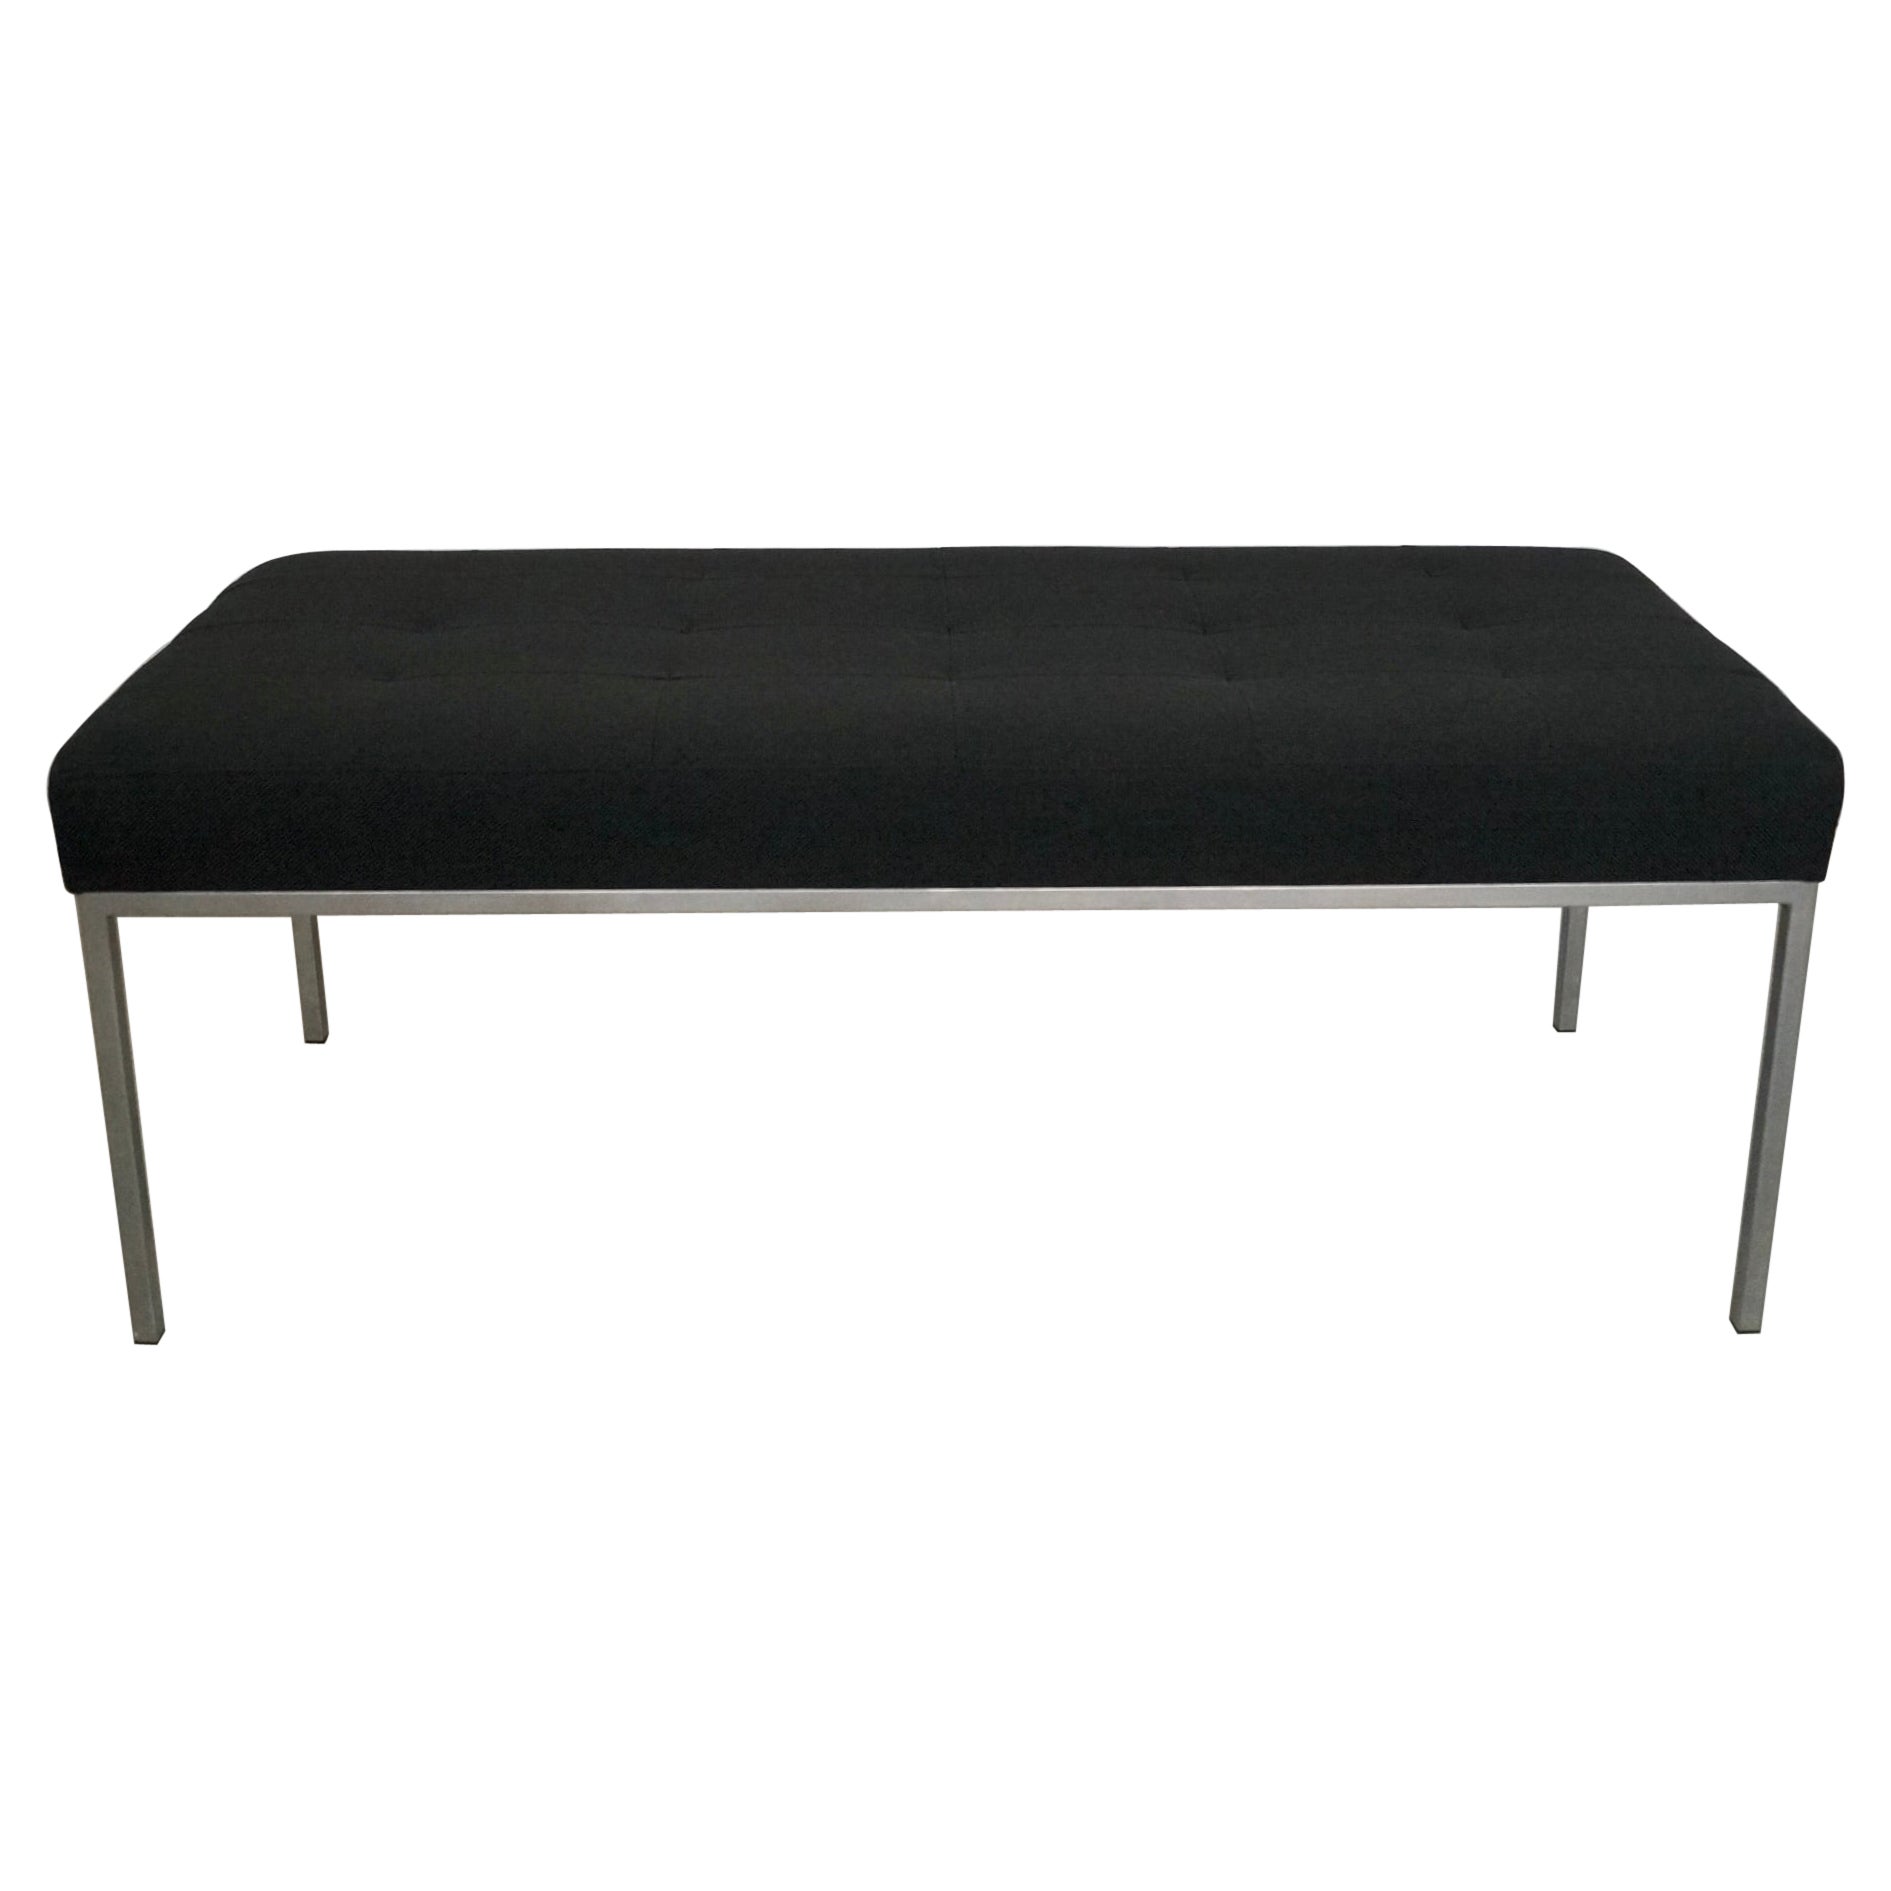 1960's Mid-Century Modern Florence Knoll Style Aluminum & Tweed Bench For Sale